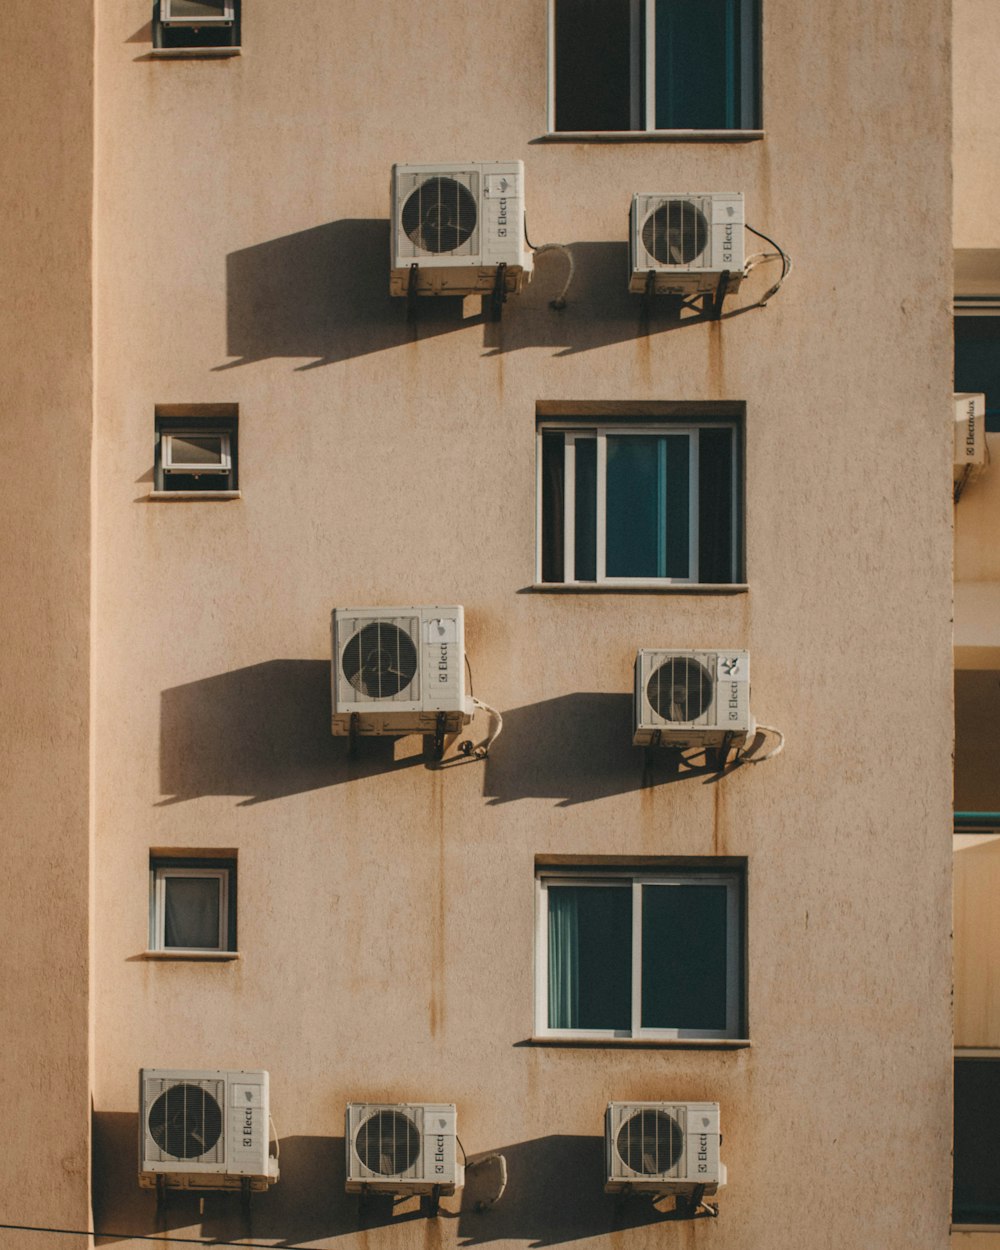 AC units mounted on wall outside building